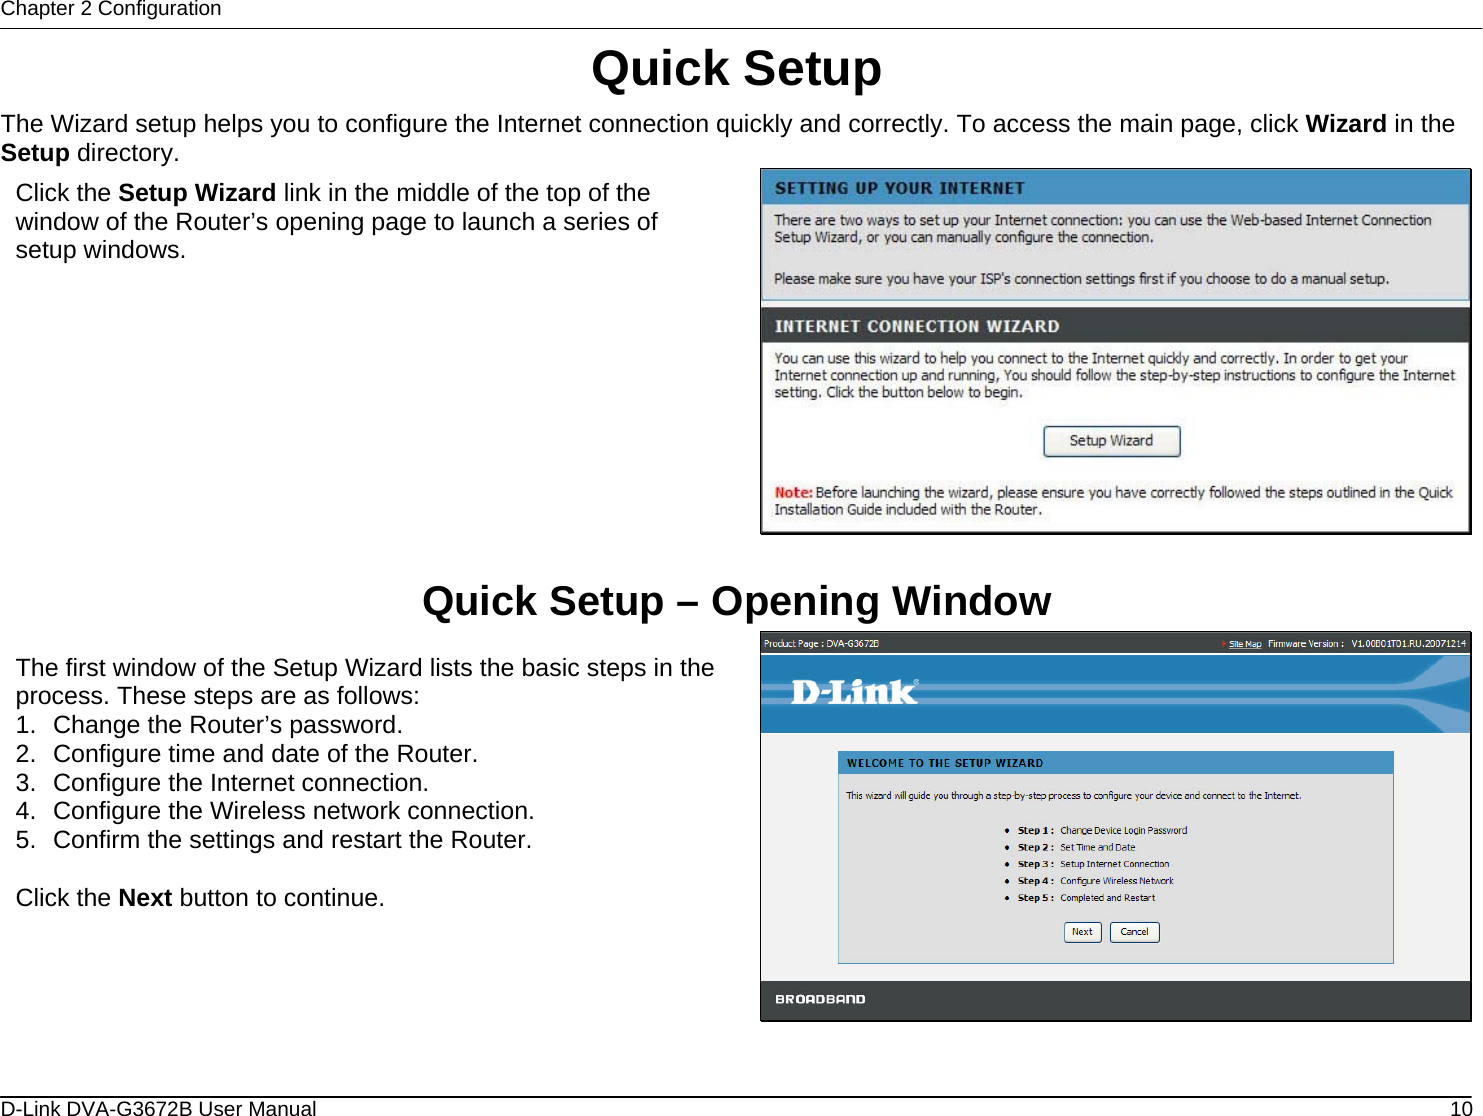 Chapter 2 Configuration Quick Setup The Wizard setup helps you to configure the Internet connection quickly and correctly. To access the main page, click Wizard in the Setup directory.  Click the Setup Wizard link in the middle of the top of the window of the Router’s opening page to launch a series of setup windows.  Quick Setup – Opening Window  The first window of the Setup Wizard lists the basic steps in the process. These steps are as follows: 1.  Change the Router’s password. 2.  Configure time and date of the Router. 3.  Configure the Internet connection. 4.  Configure the Wireless network connection. 5.  Confirm the settings and restart the Router.  Click the Next button to continue.  D-Link DVA-G3672B User Manual  10